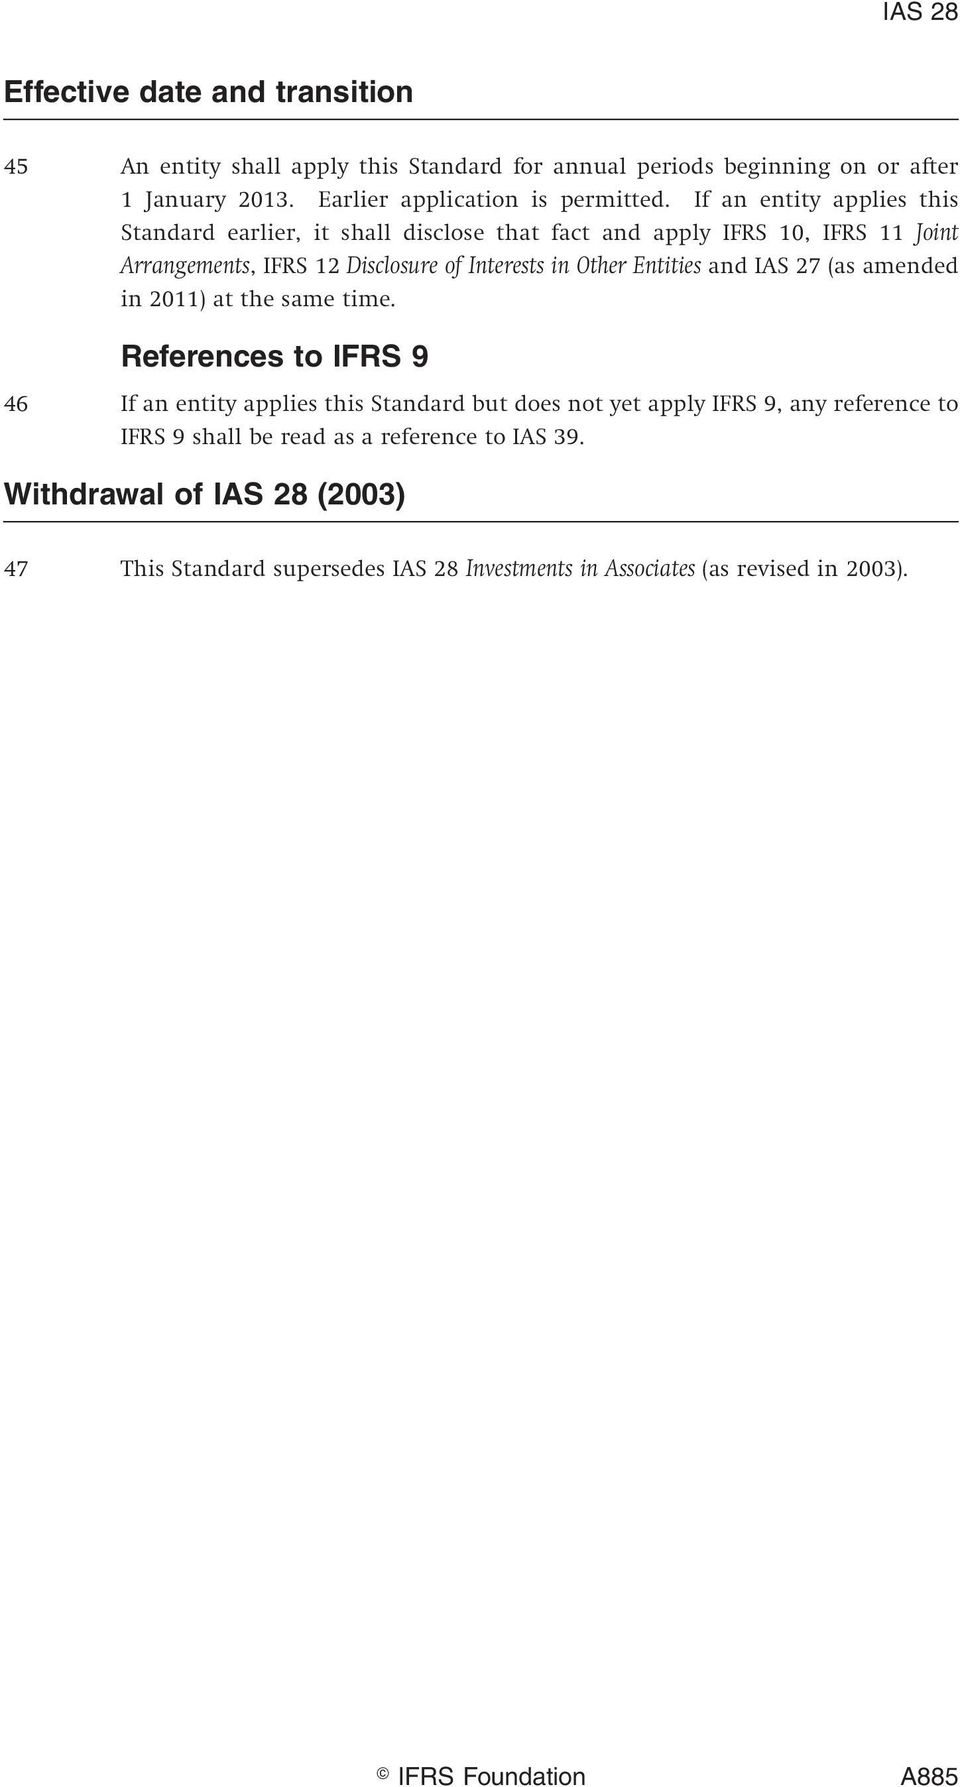 Entities and IAS 27 (as amended in 2011) at the same time.